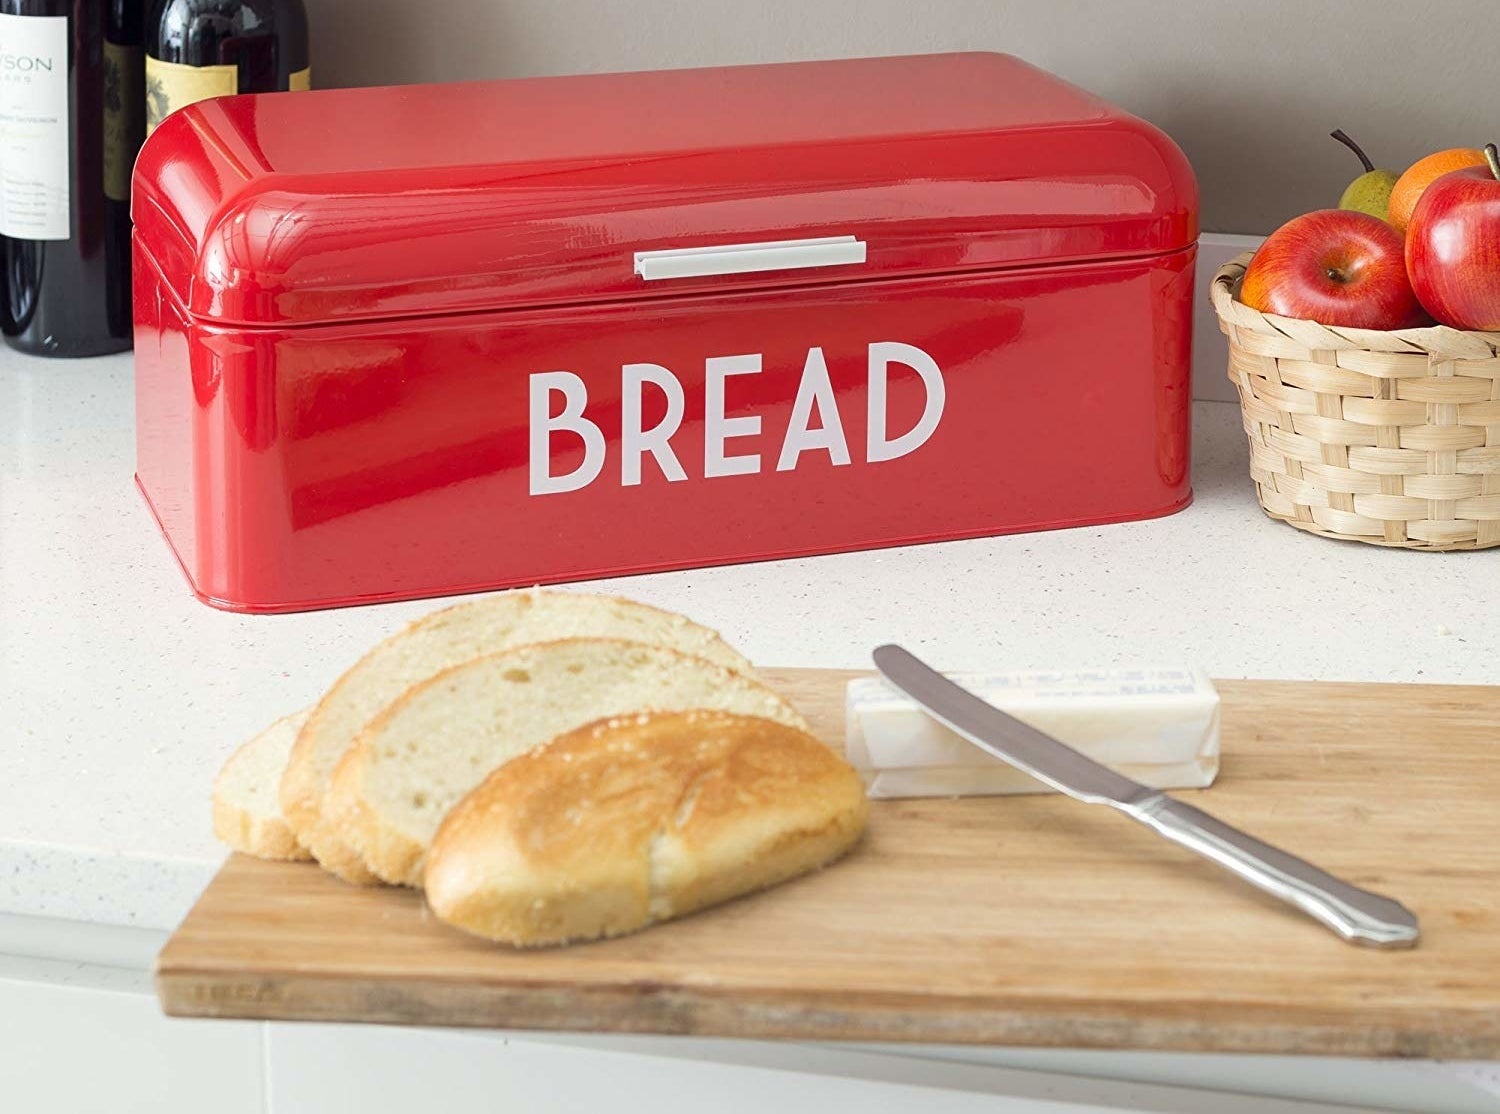 Promising review: "Cutest bread box ever! 